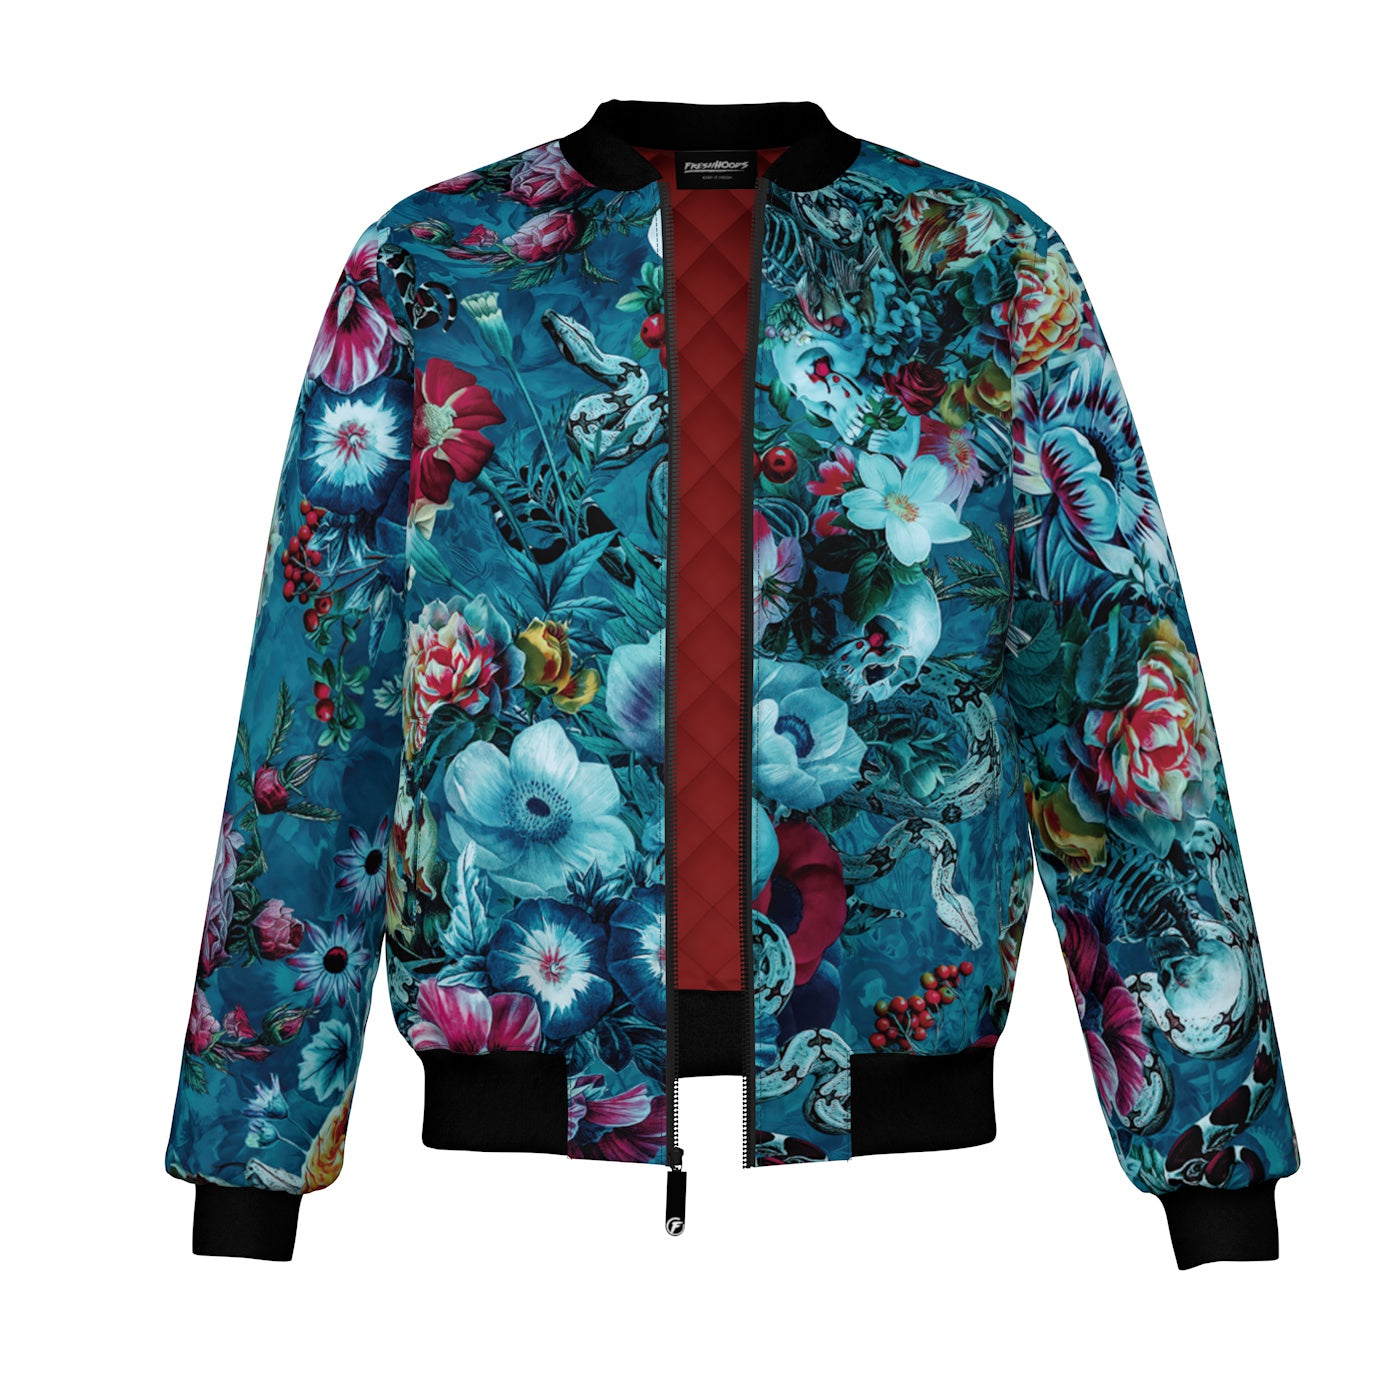 Bottomless Abyss Bomber Jacket